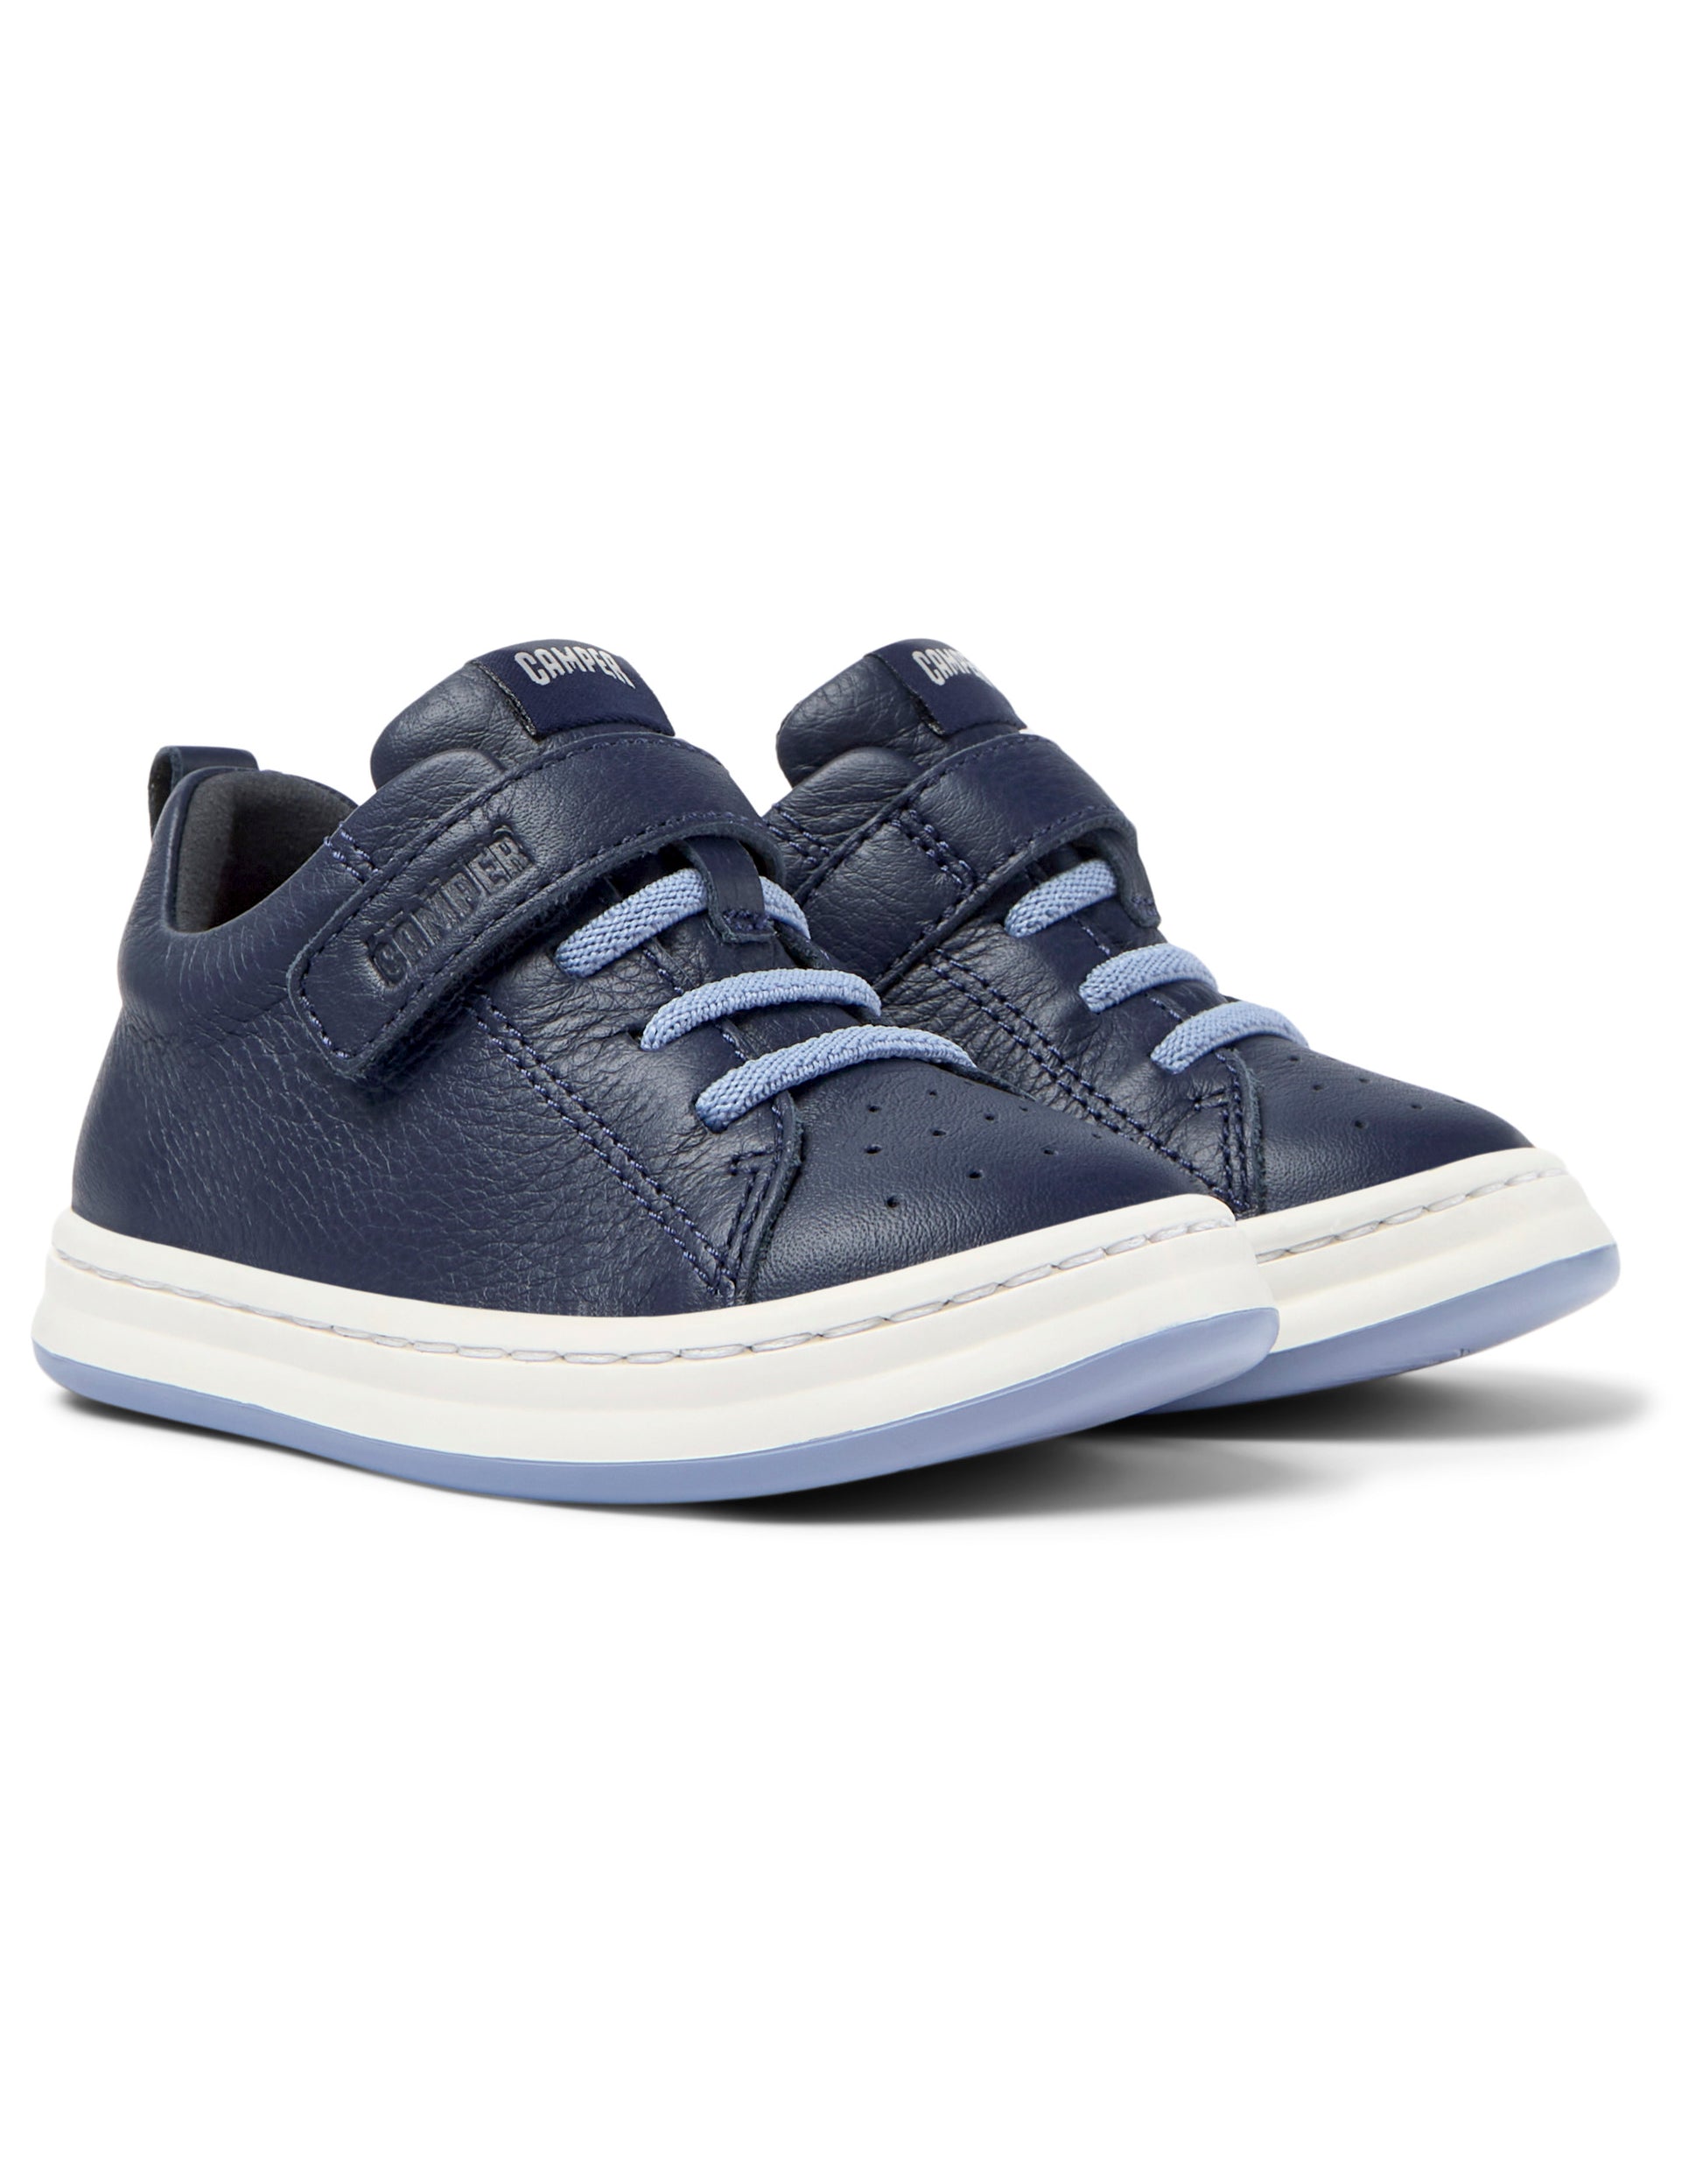 A boys shoe by Camper, style Runner FW, in navy with a velcro strap and light blue elastic laces. Angled view of a pair.